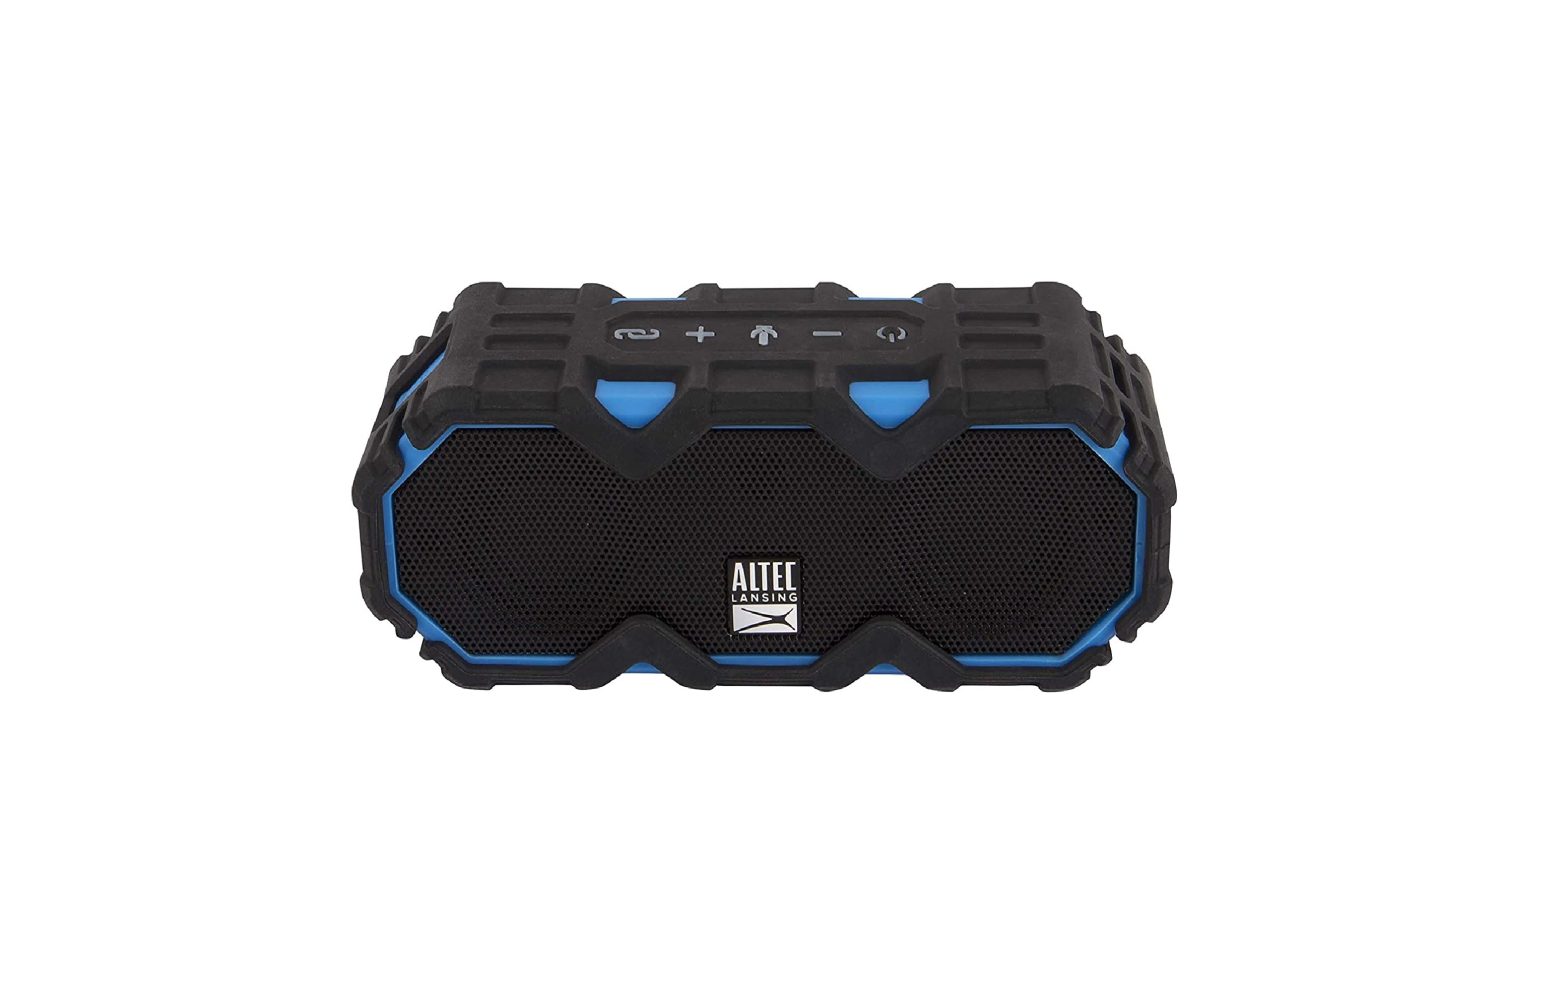 ALTEC LANSING IMW578L Life Jacket 3 with Lights Rugged Bluetooth Speaker User Guide